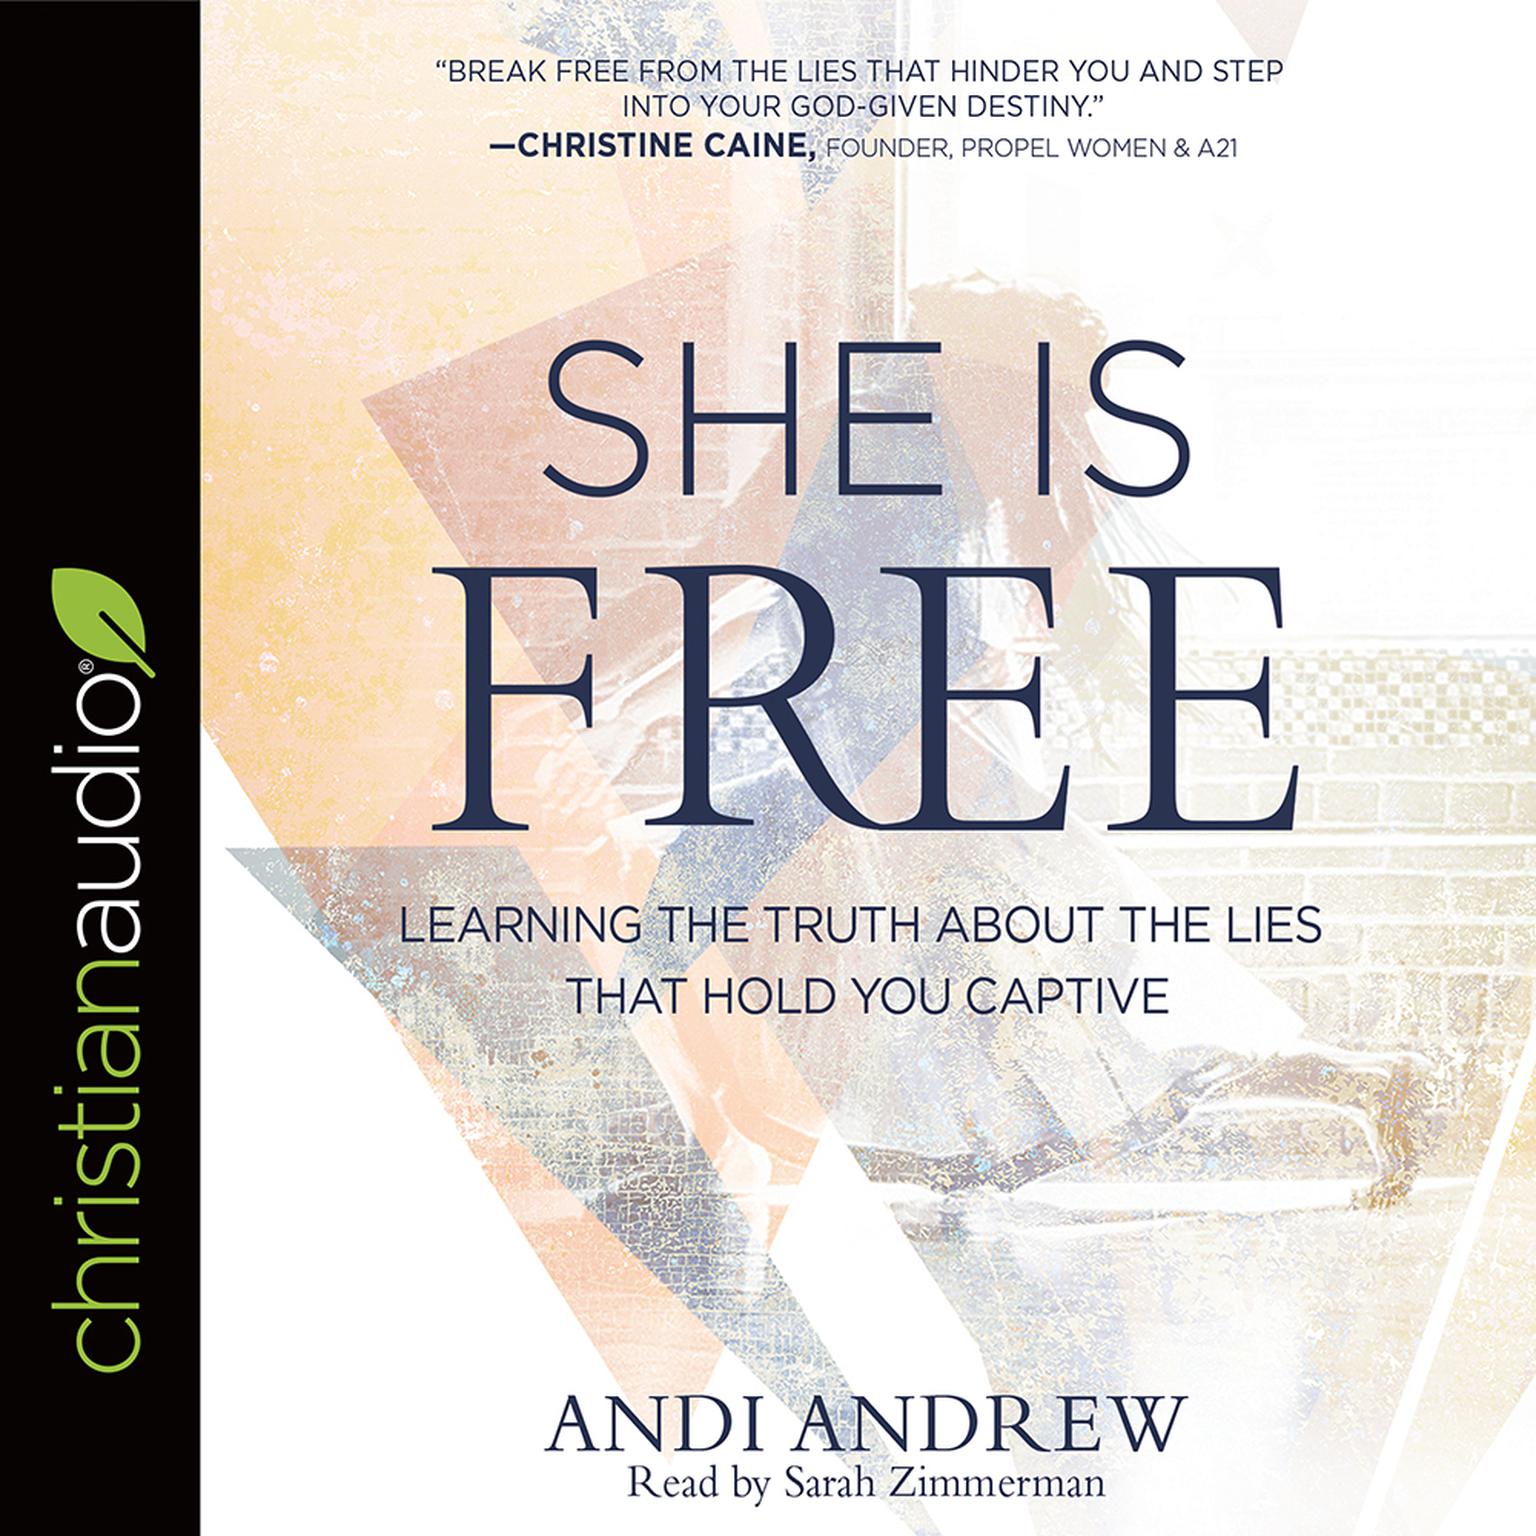 She Is Free: Learning the Truth about the Lies that Hold You Captive Audiobook, by Andi Andrew